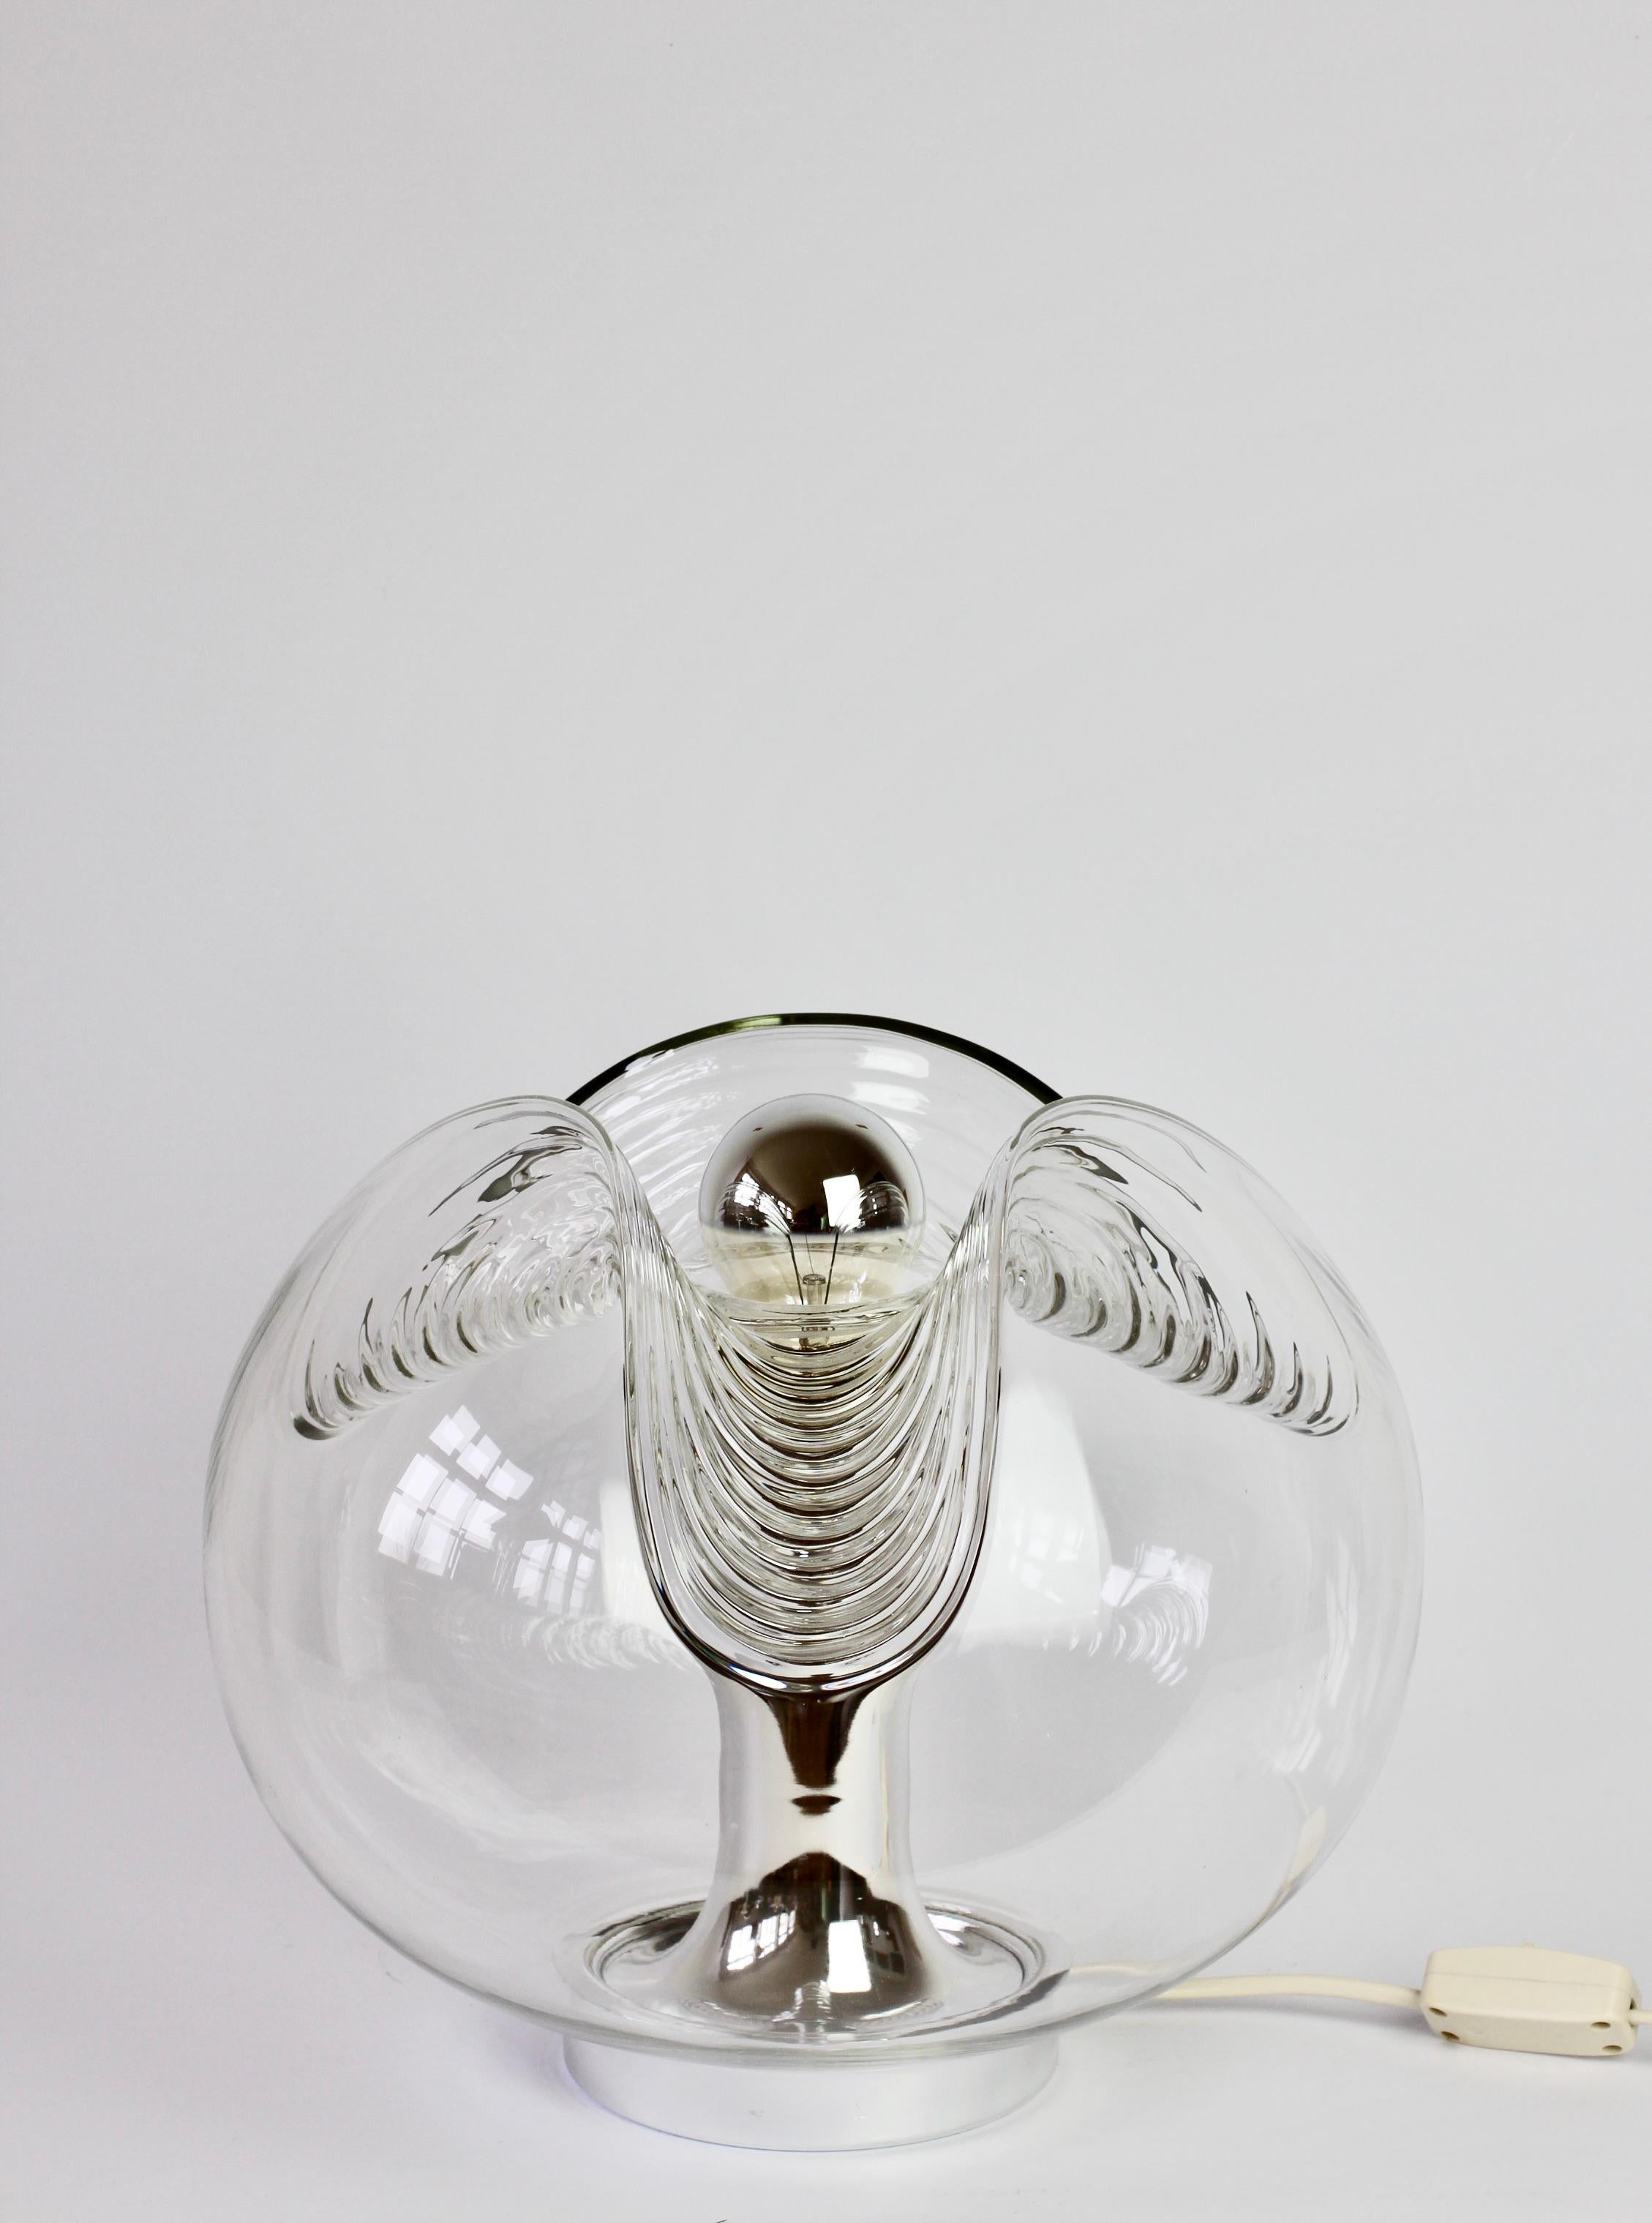 Molded Peill & Putzler Large 1970s Clear Textured Glass Biomorphic Table Lamp / Light